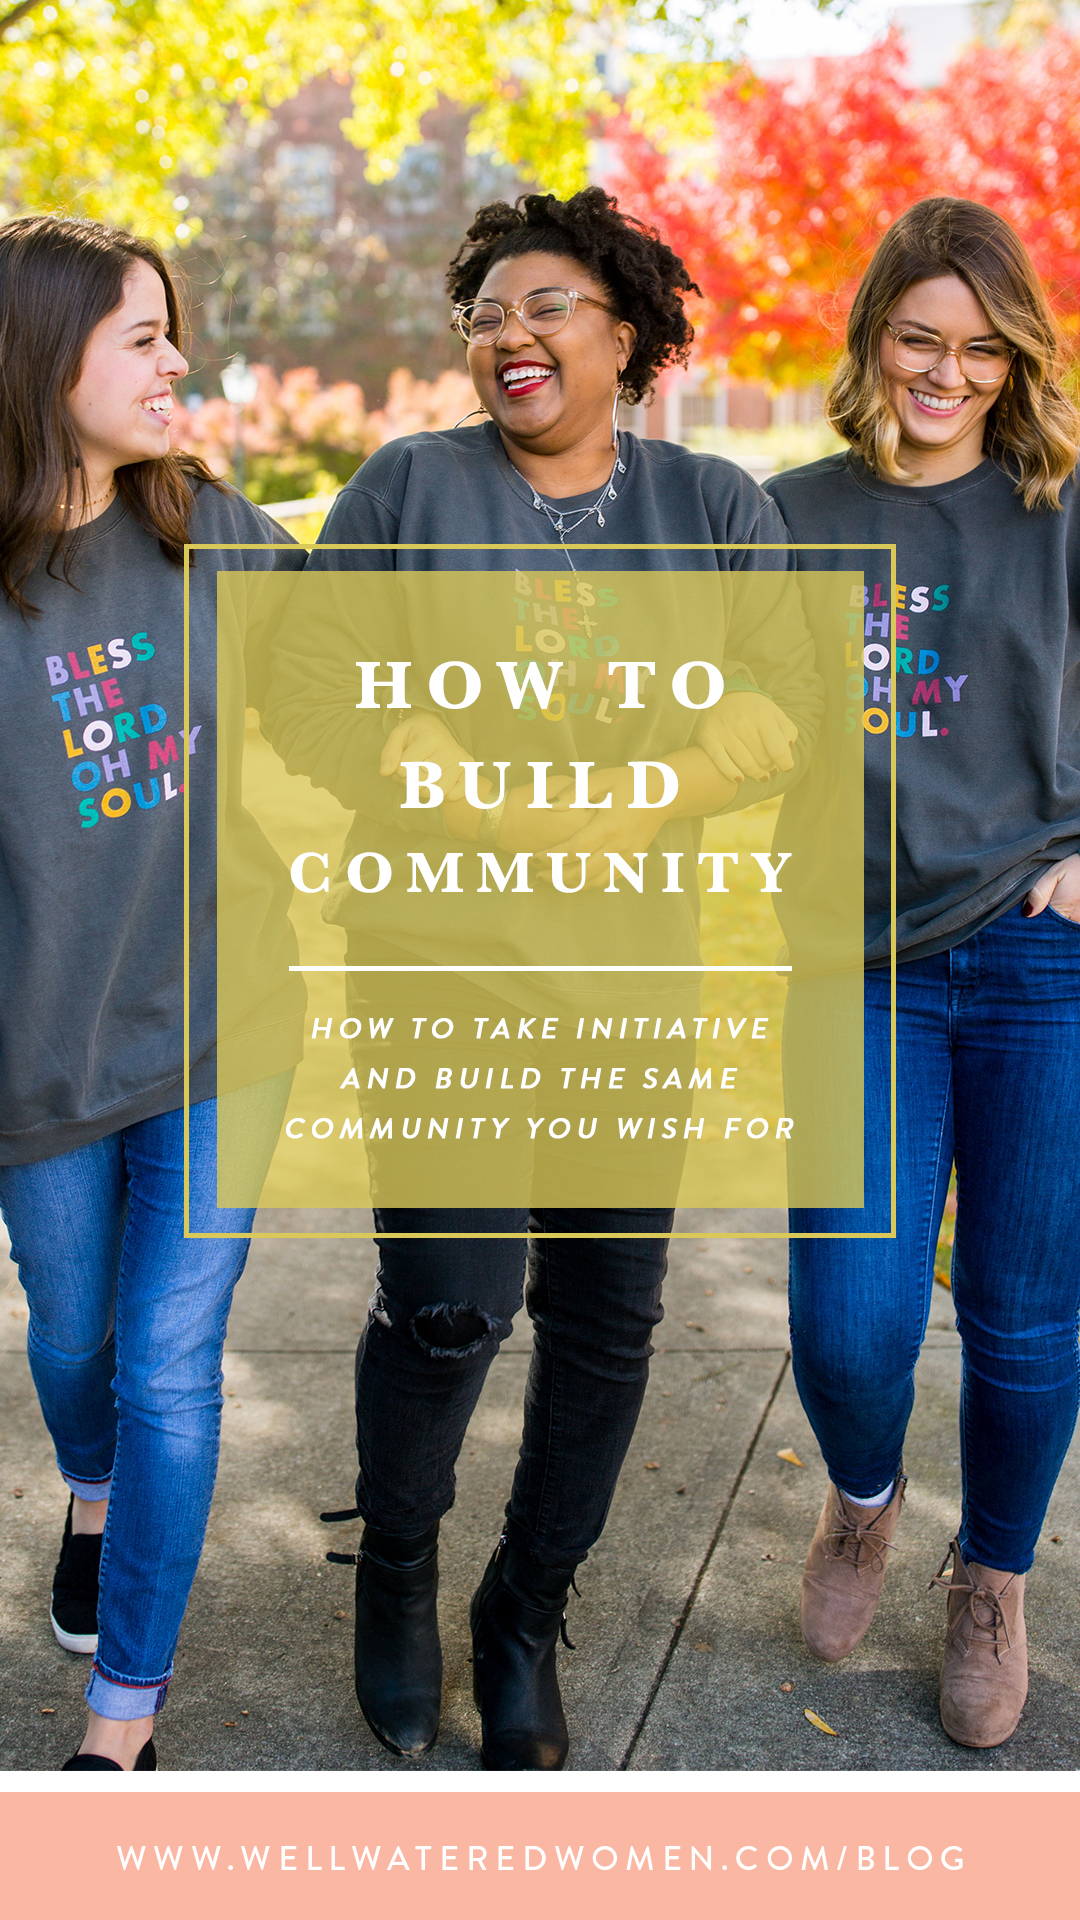 How to Build Community: Because God has invited us into community, we are CALLED to be community builders.